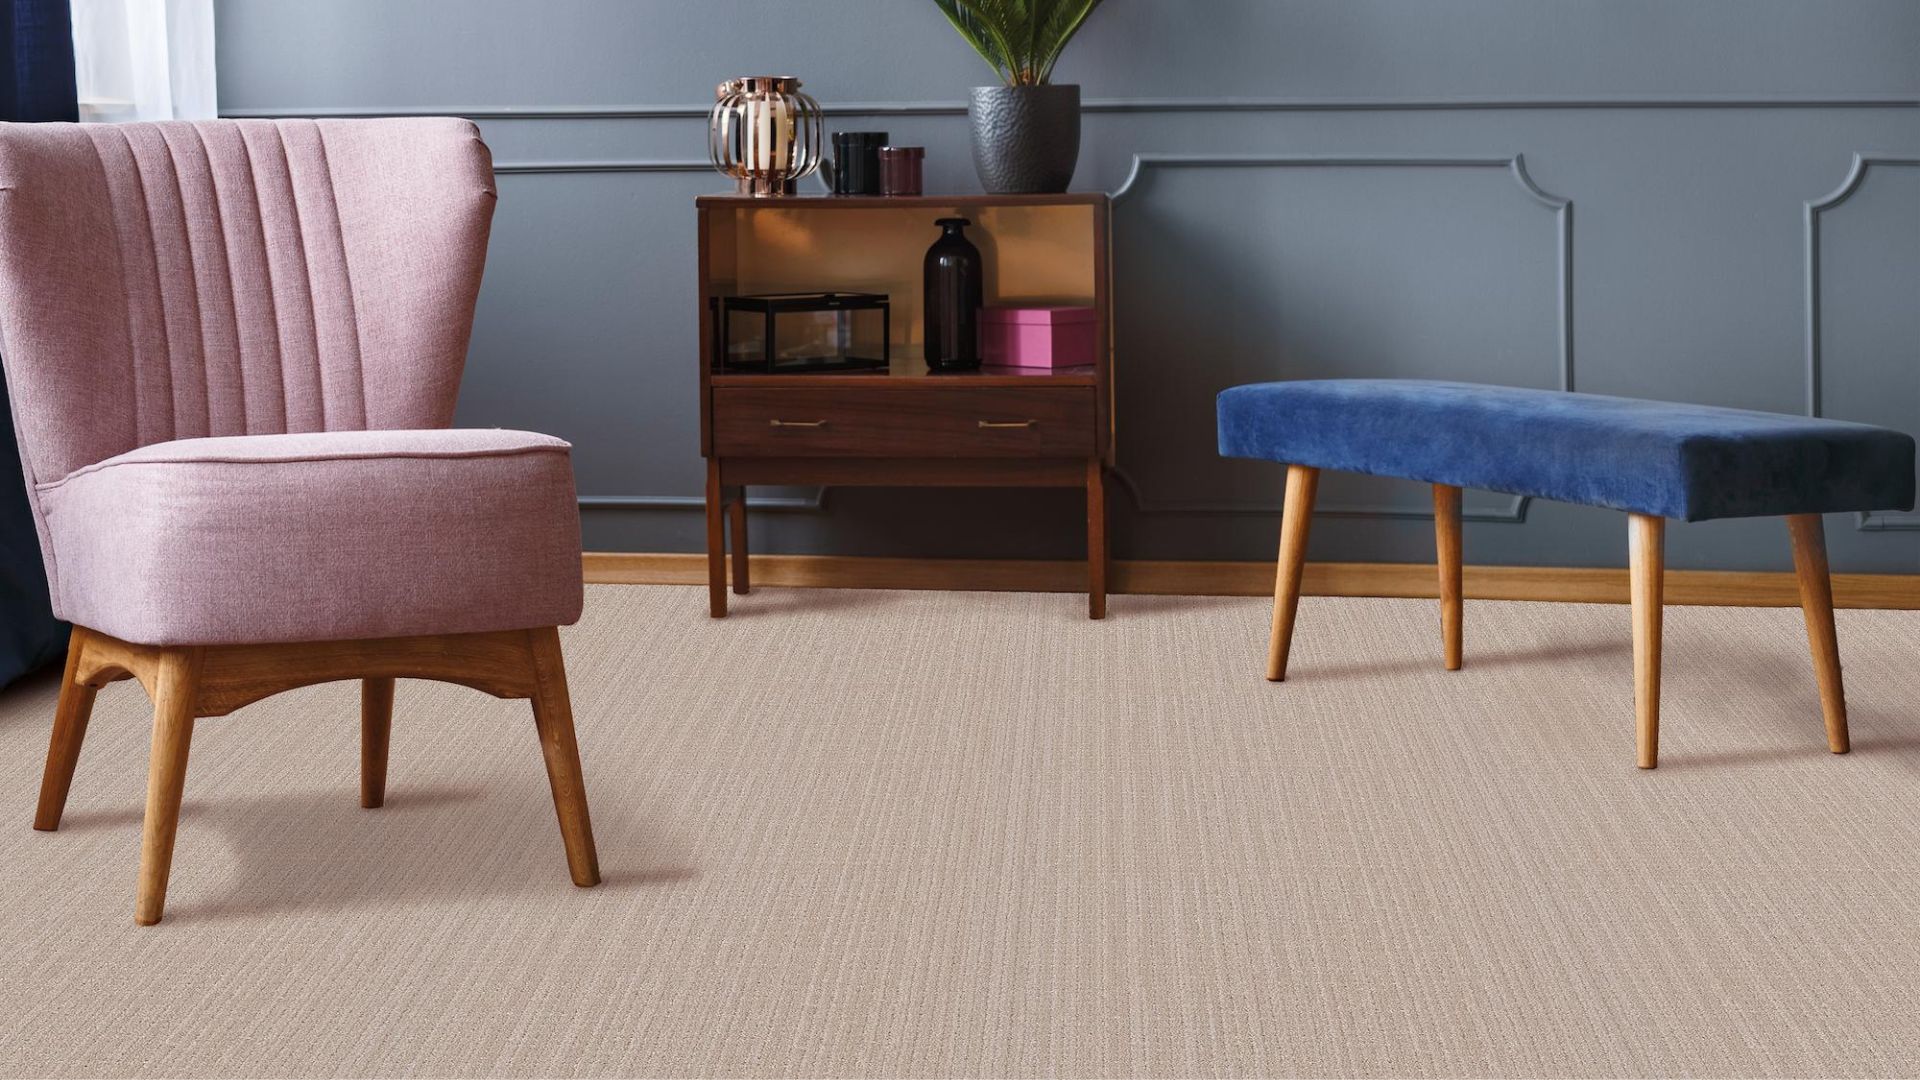 textured beige carpets in a stylish living room with pink chair and blue accent wall